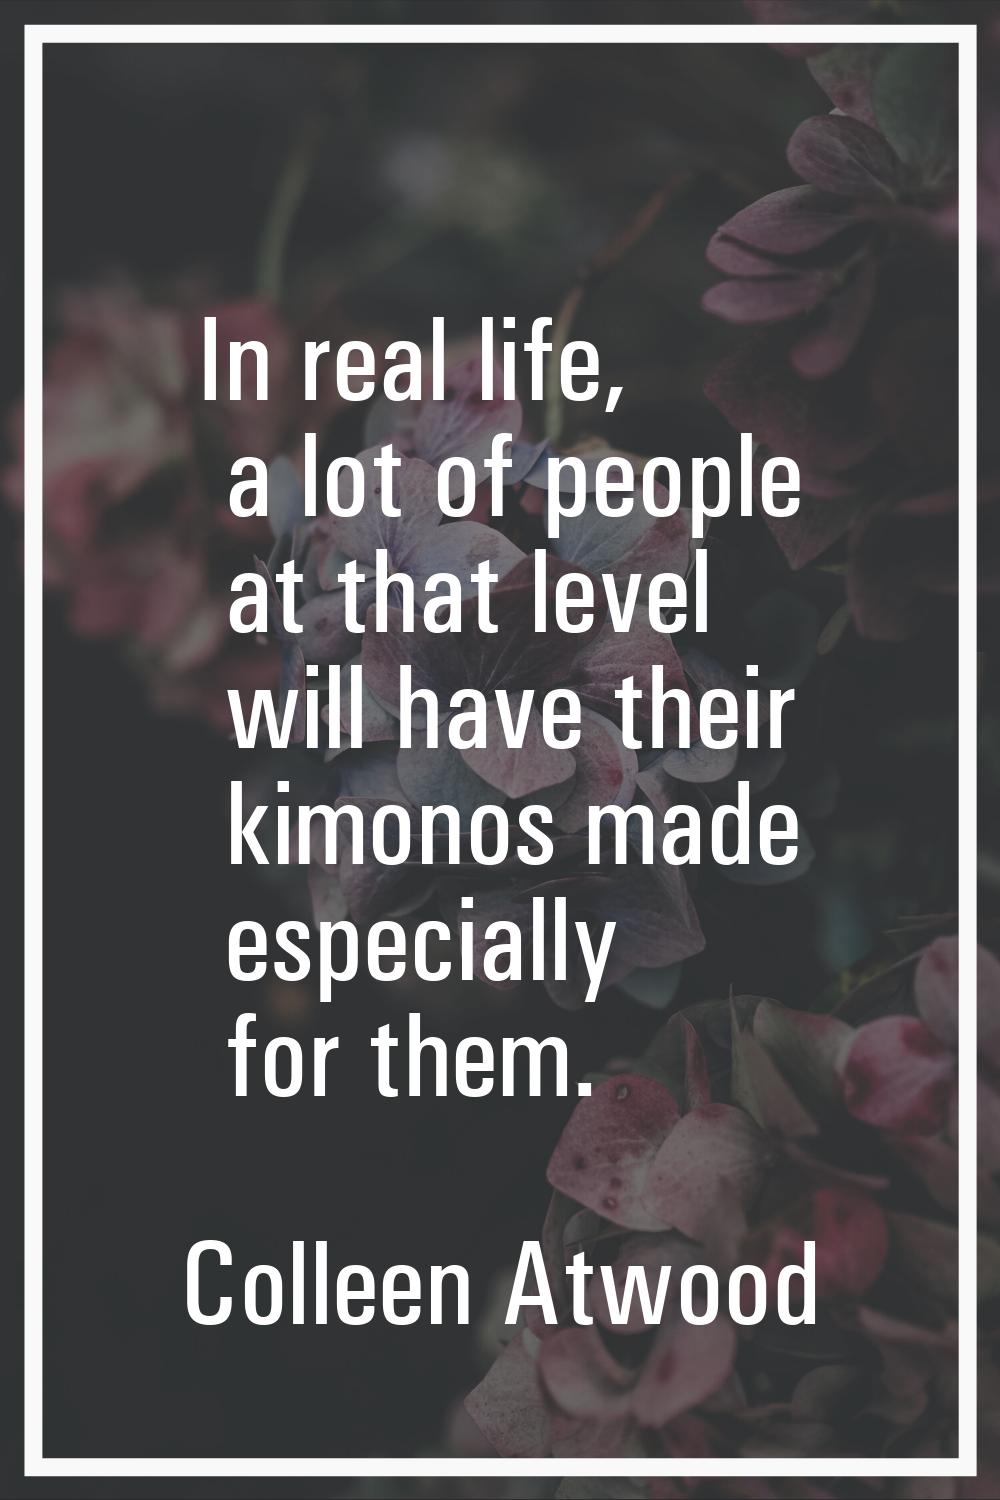 In real life, a lot of people at that level will have their kimonos made especially for them.